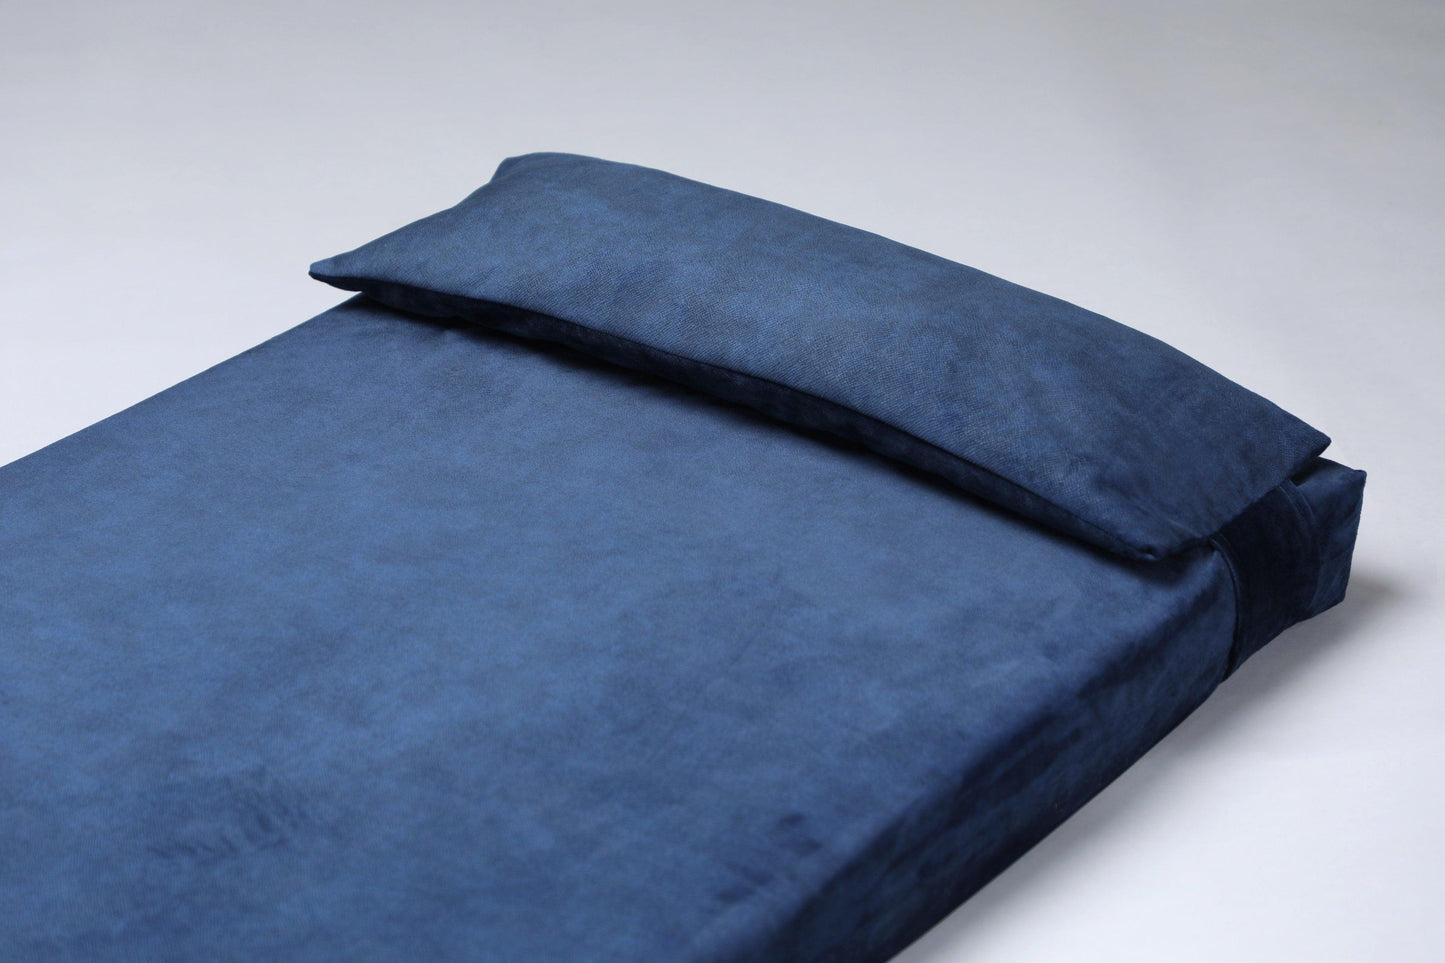 XXL only | 2-sided extra large & supportive dog bed. ROYAL BLUE - premium dog goods handmade in Europe by animalistus